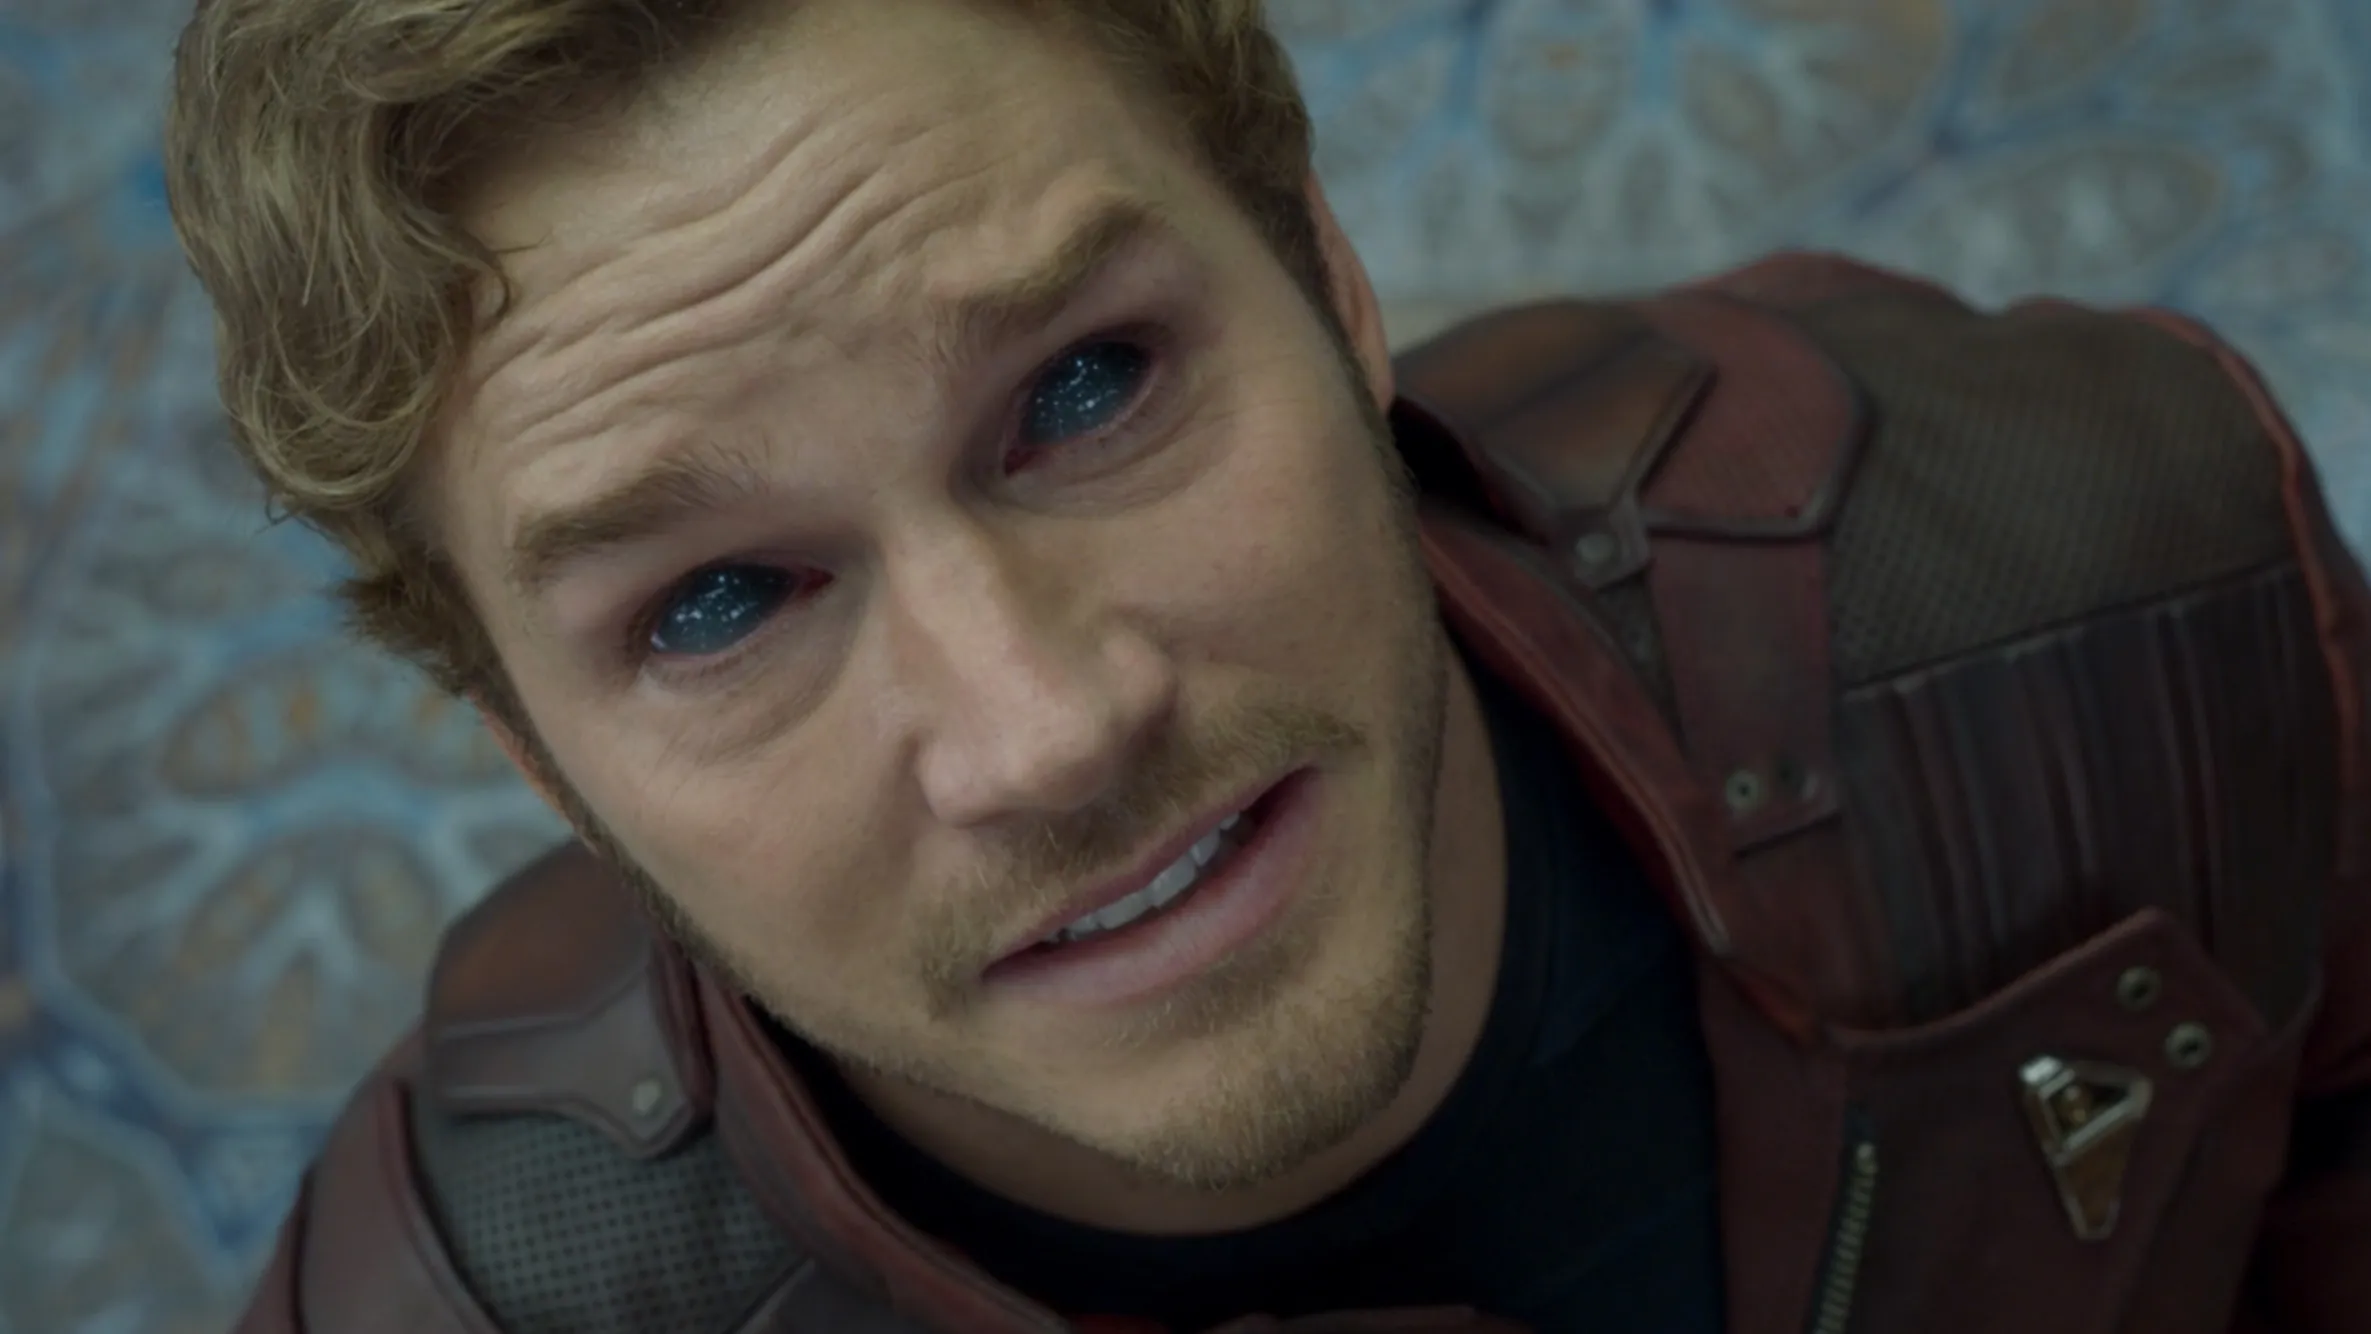 Has Star-Lord really lost his powers, or are they just laying